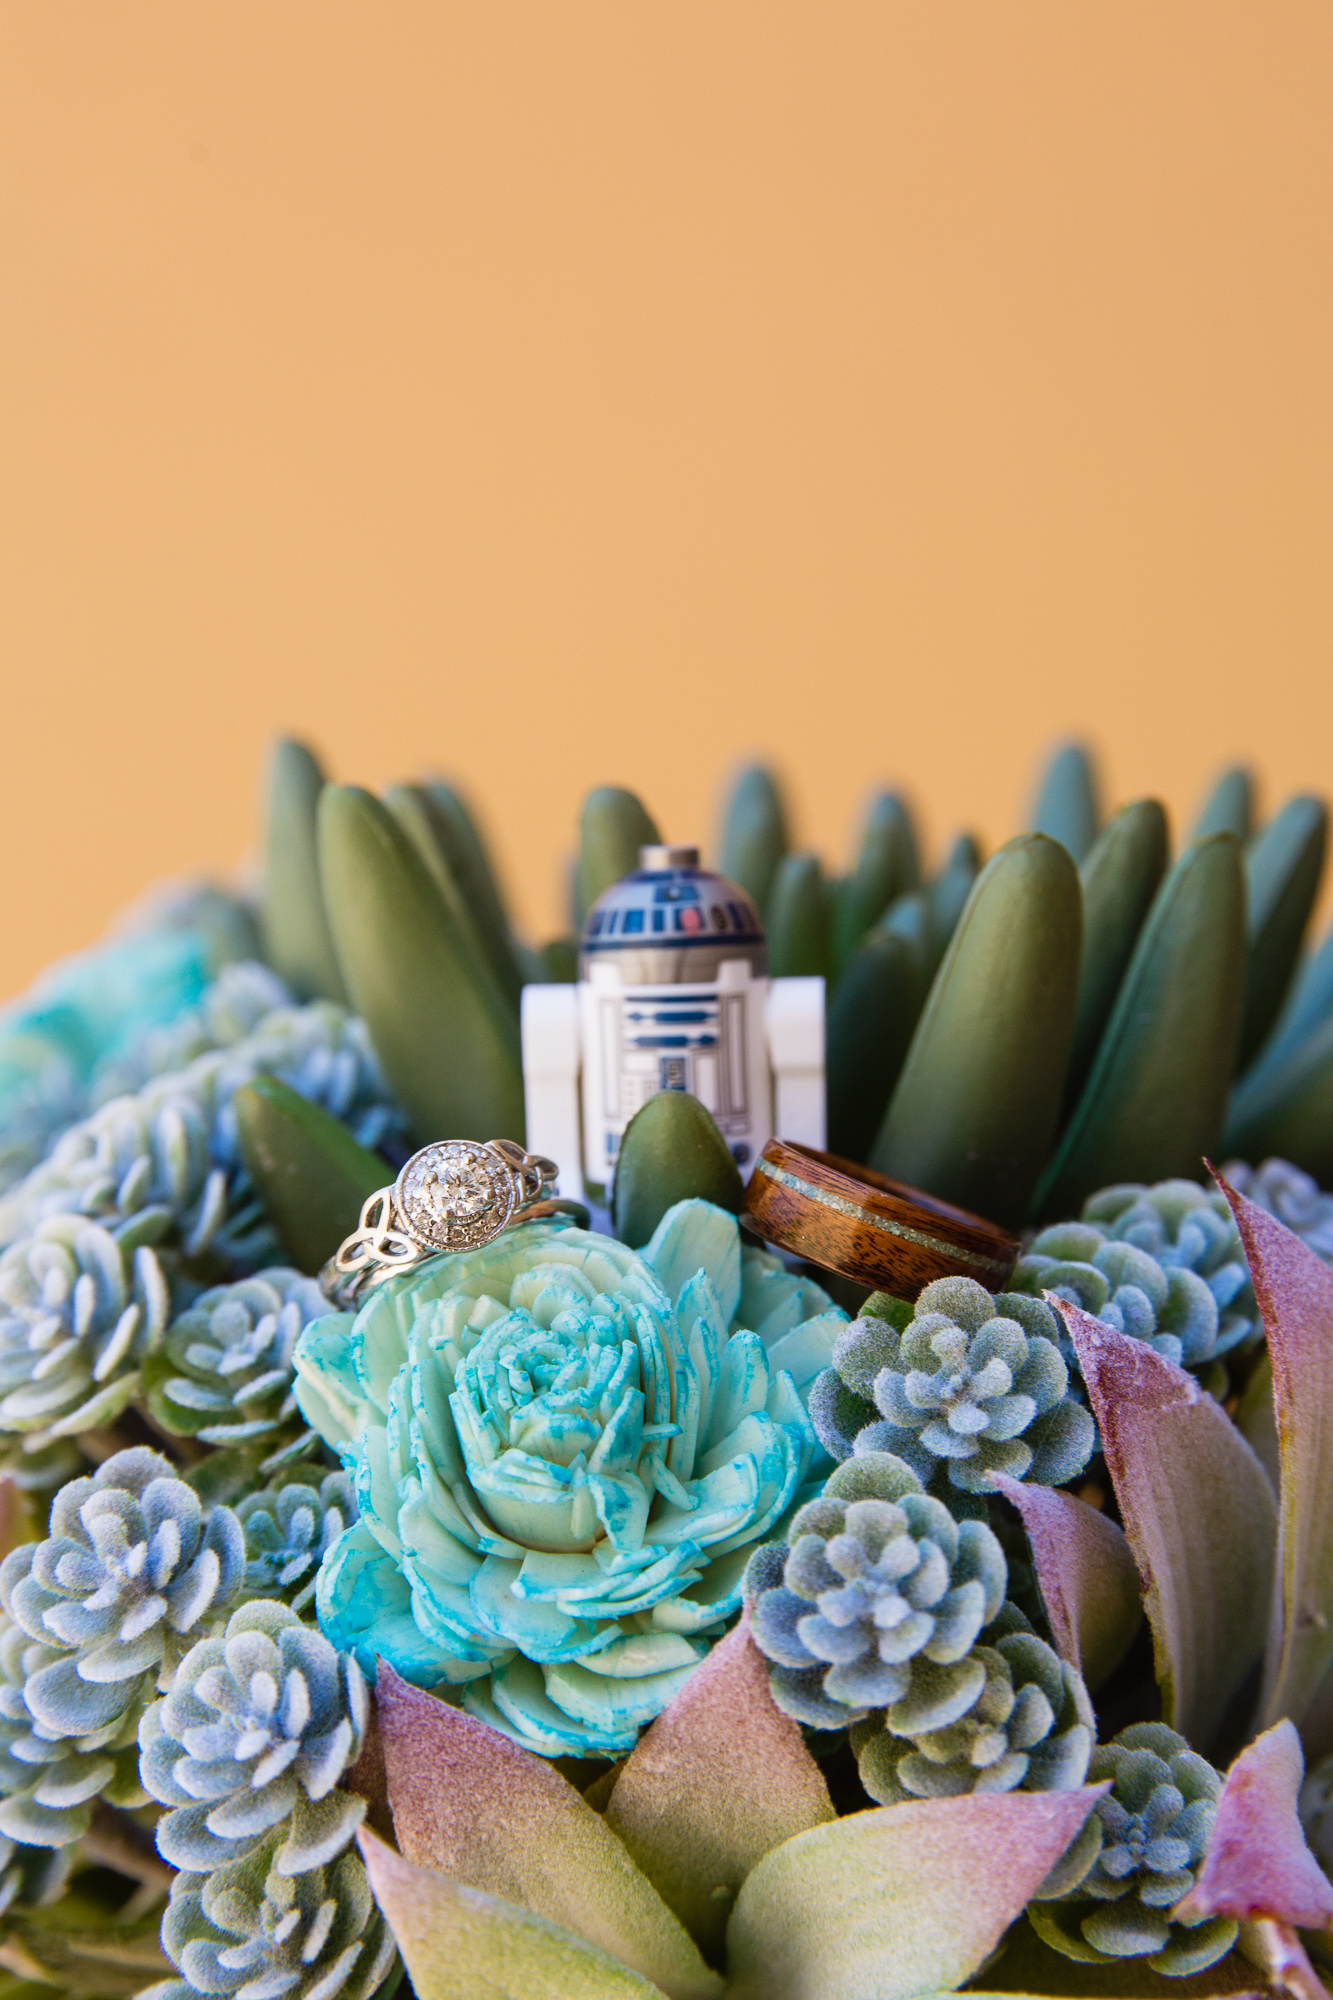 Bride and groom's wedding rings in a wood flower and succulent wedding bouquet with R2D2 for a Star Wars wedding by Arizona wedding photographer PMA Photography.